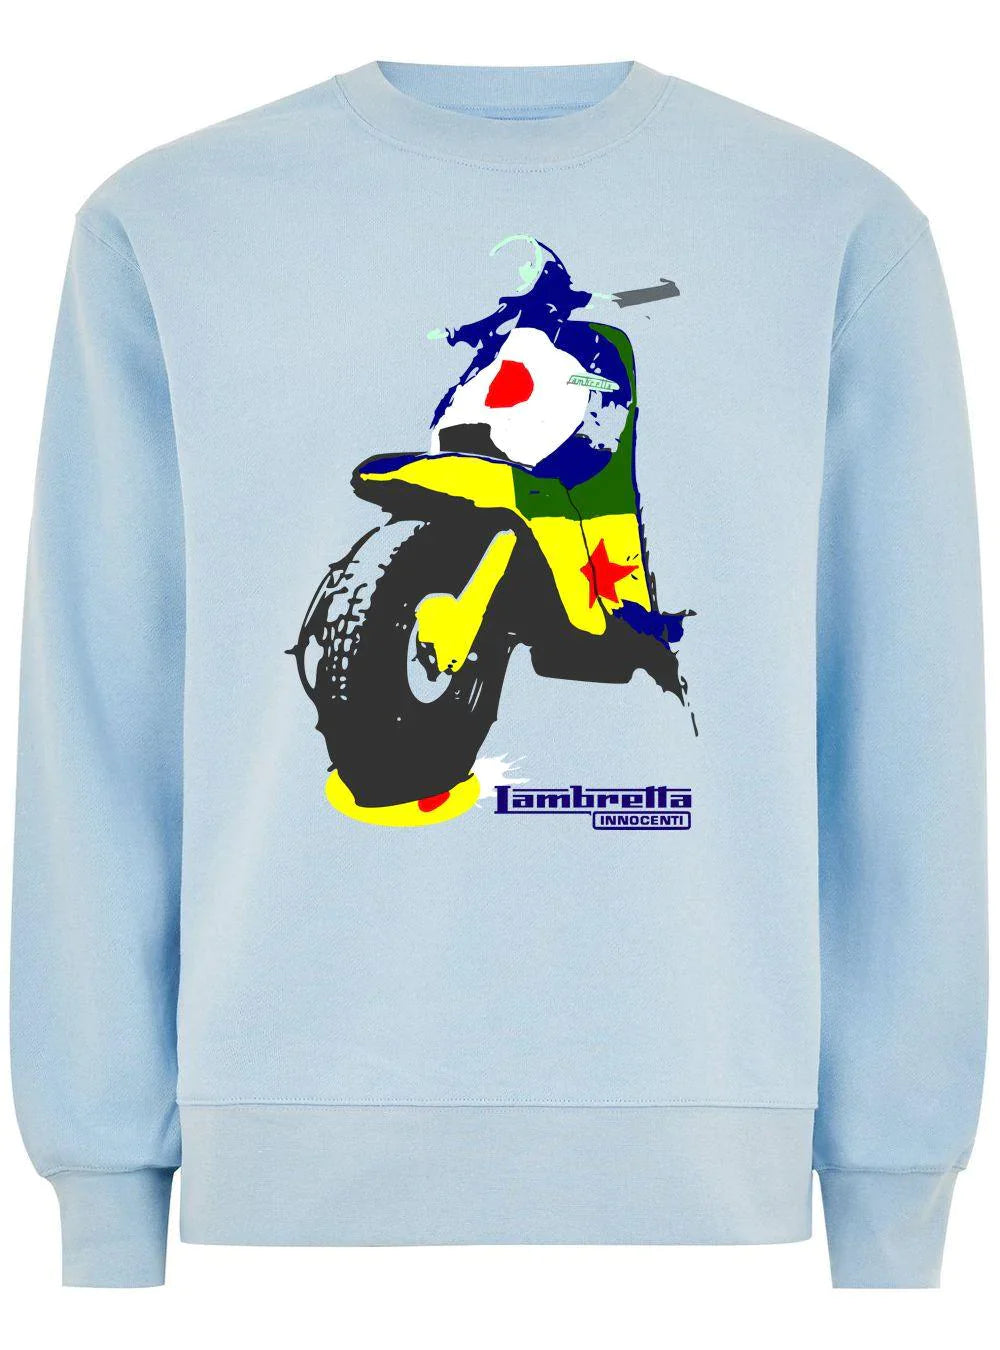 Pop Art Lambretta: Sweatshirt Inspired by Peter Blake and Classic Scooters - SOUND IS COLOUR